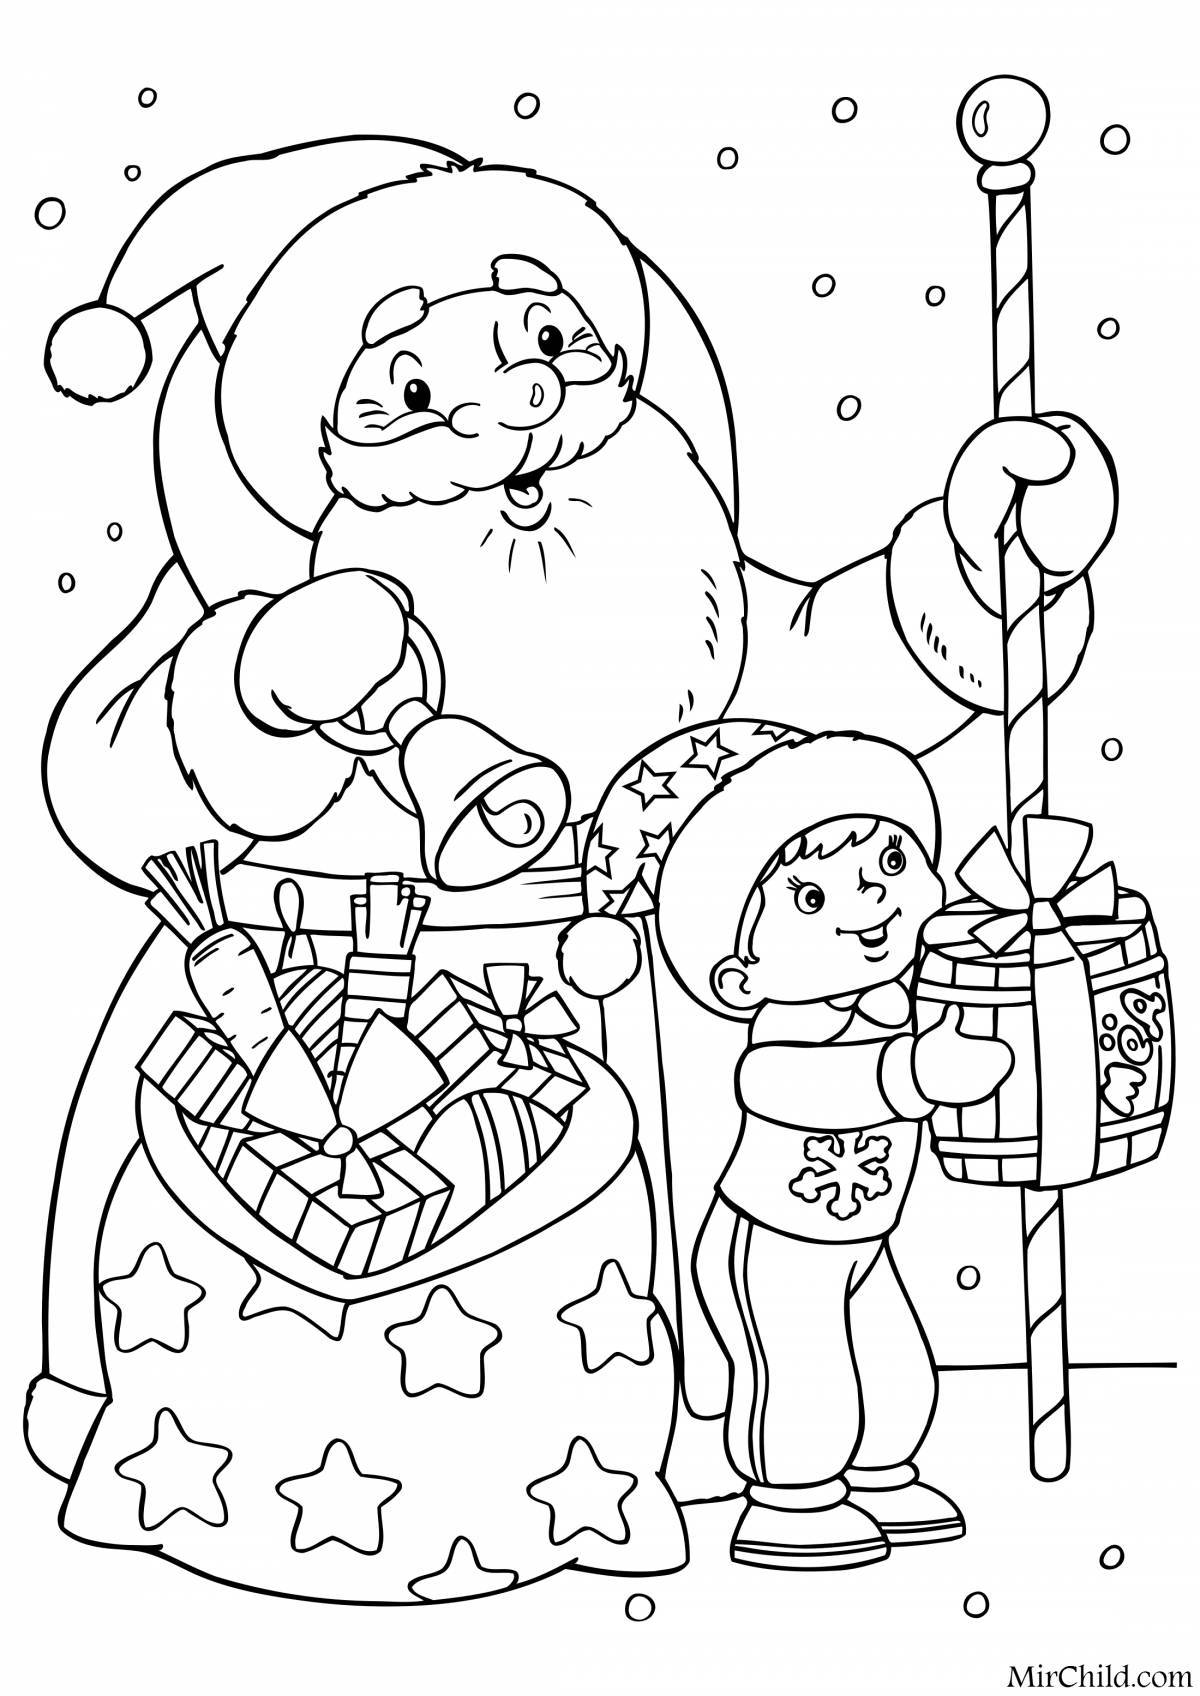 Santa Claus and Snow Maiden for kids #11